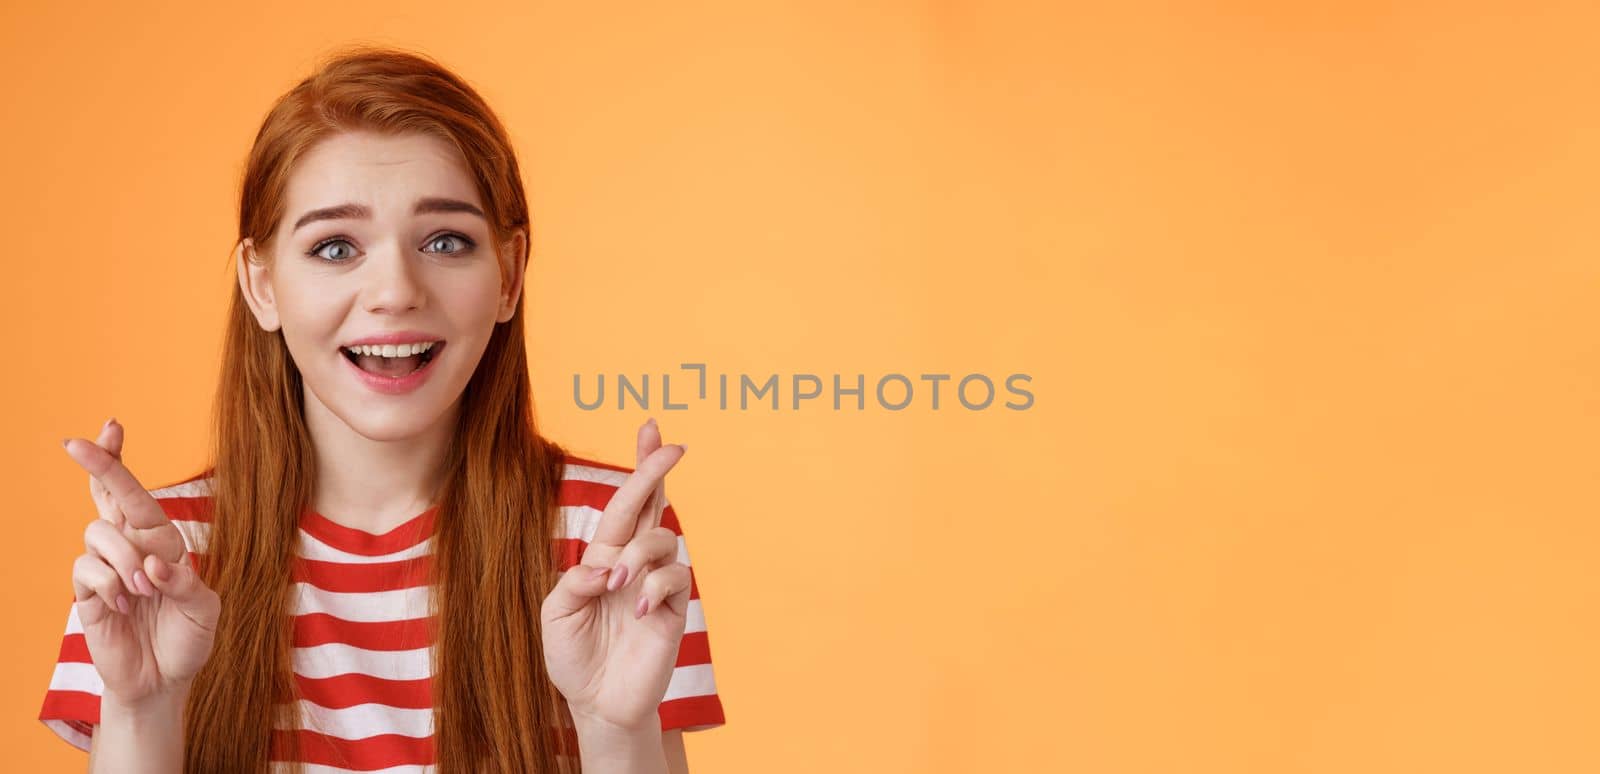 Excited hopeful redhead girl hope win lottery, smiling optimistic, look faith, believe dream come true, cross fingers good luck, make wish, anticipate good news, praying fortune, orange background by Benzoix